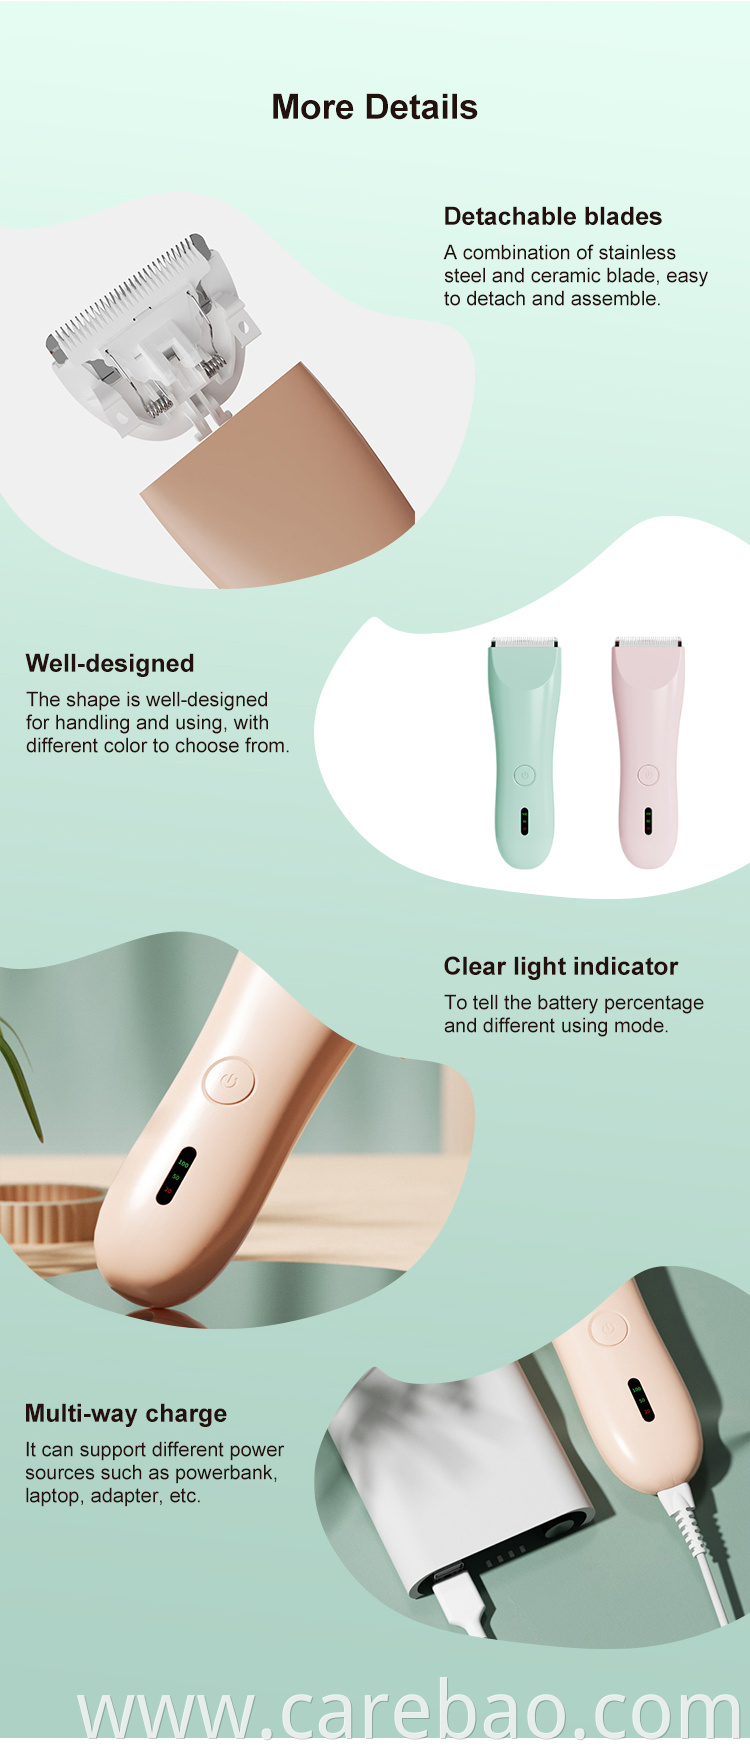 2022 Professional Carbao Best Selling Baby Product Cordless Waterproof Baby Hair Clippers Body Trimmers Sets